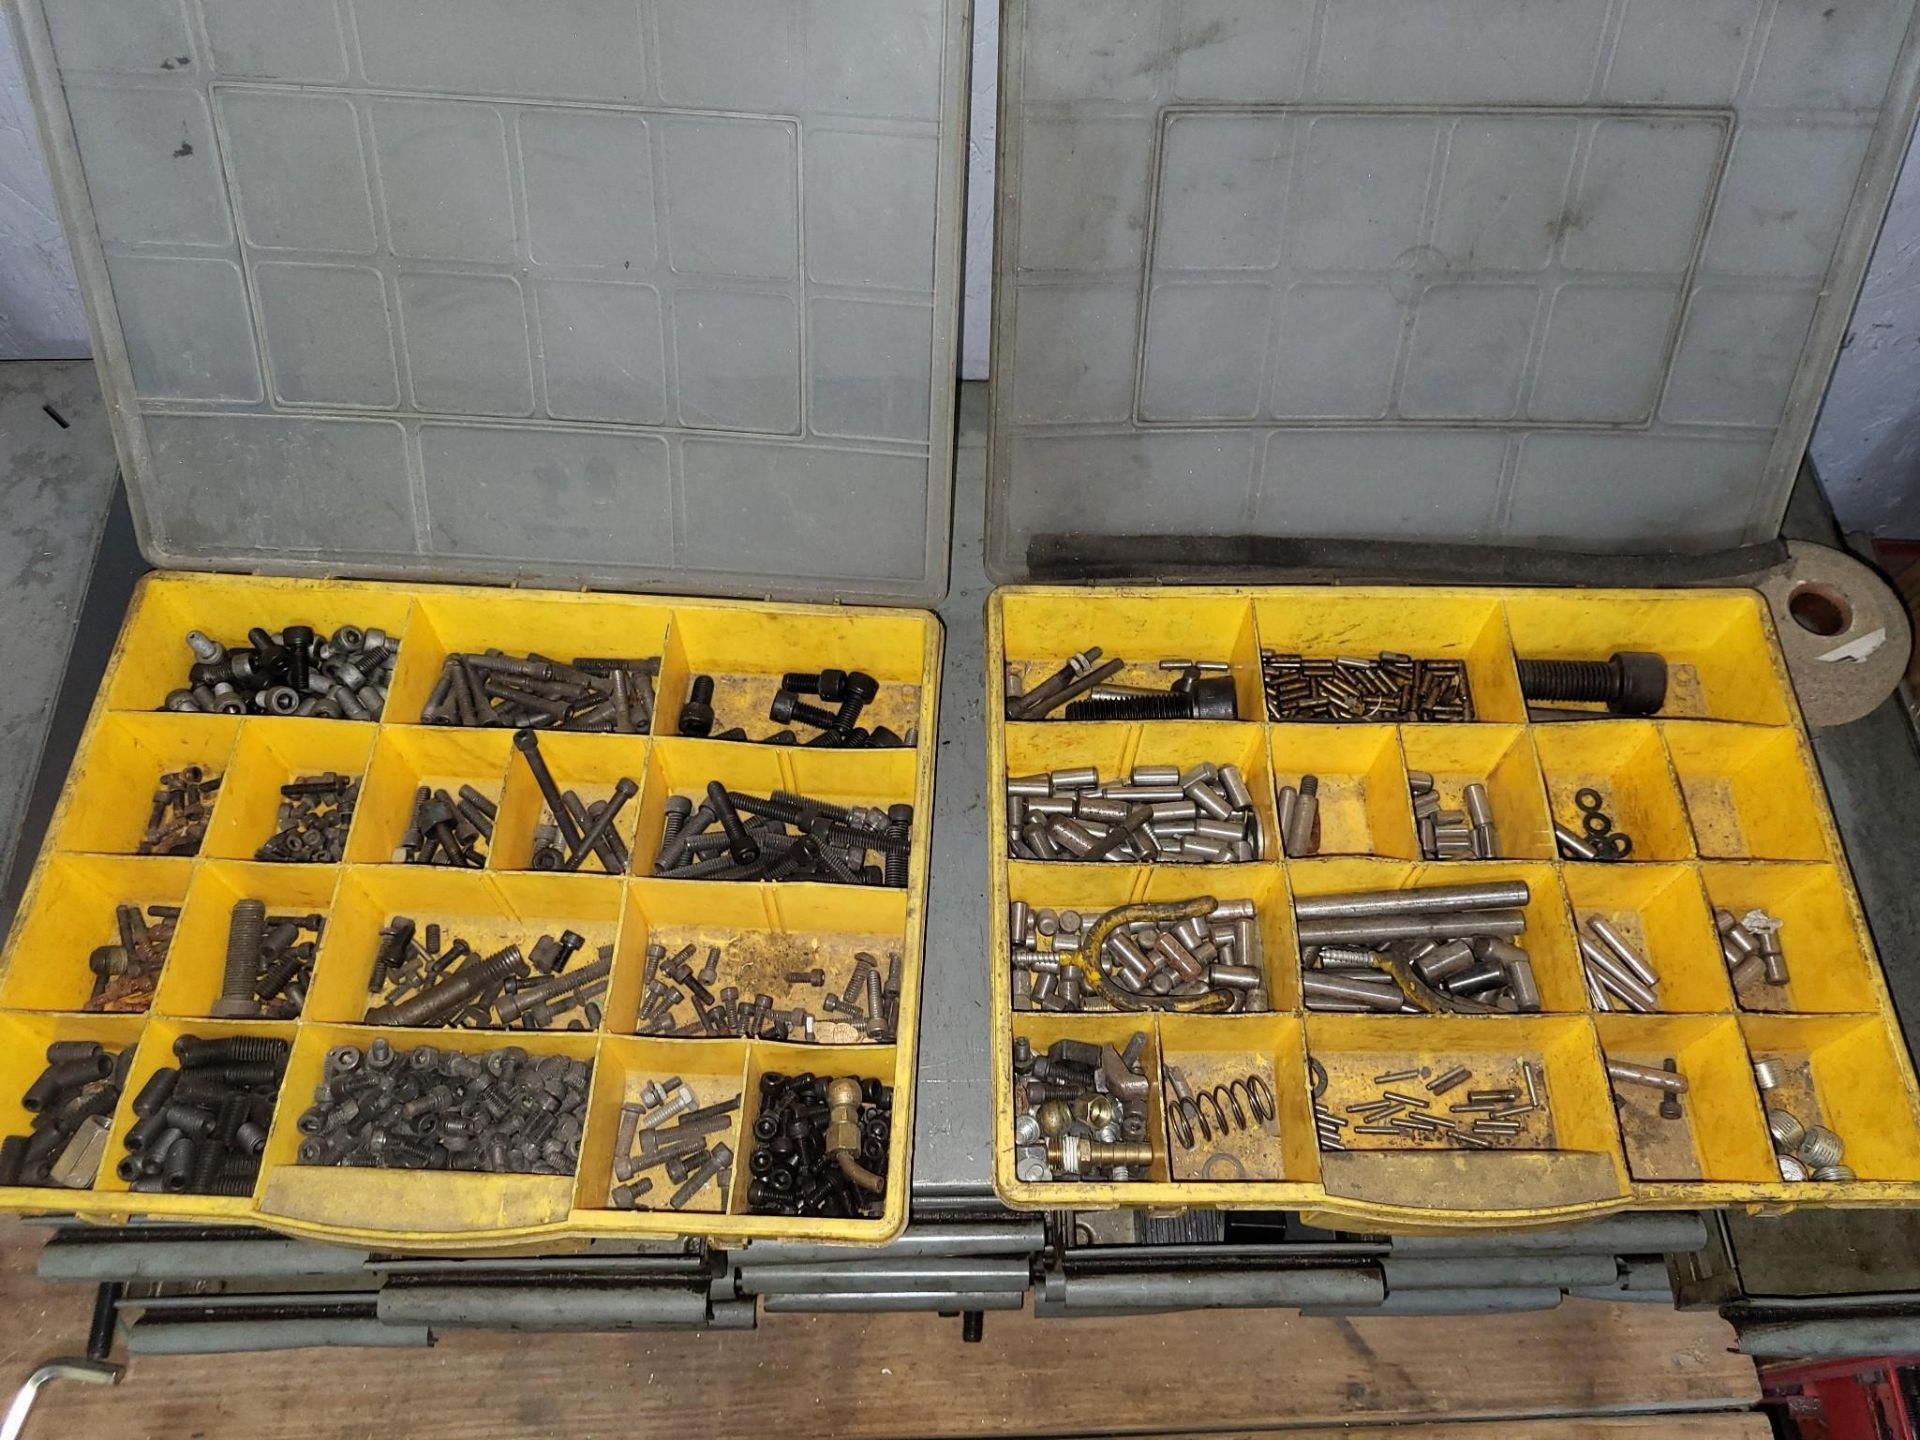 LARGE LOT OF MILLING TOOLS, TAPS, CARBIDE INSERTS, SETUP HARDWARE AND HAND TOOLS - Image 24 of 24